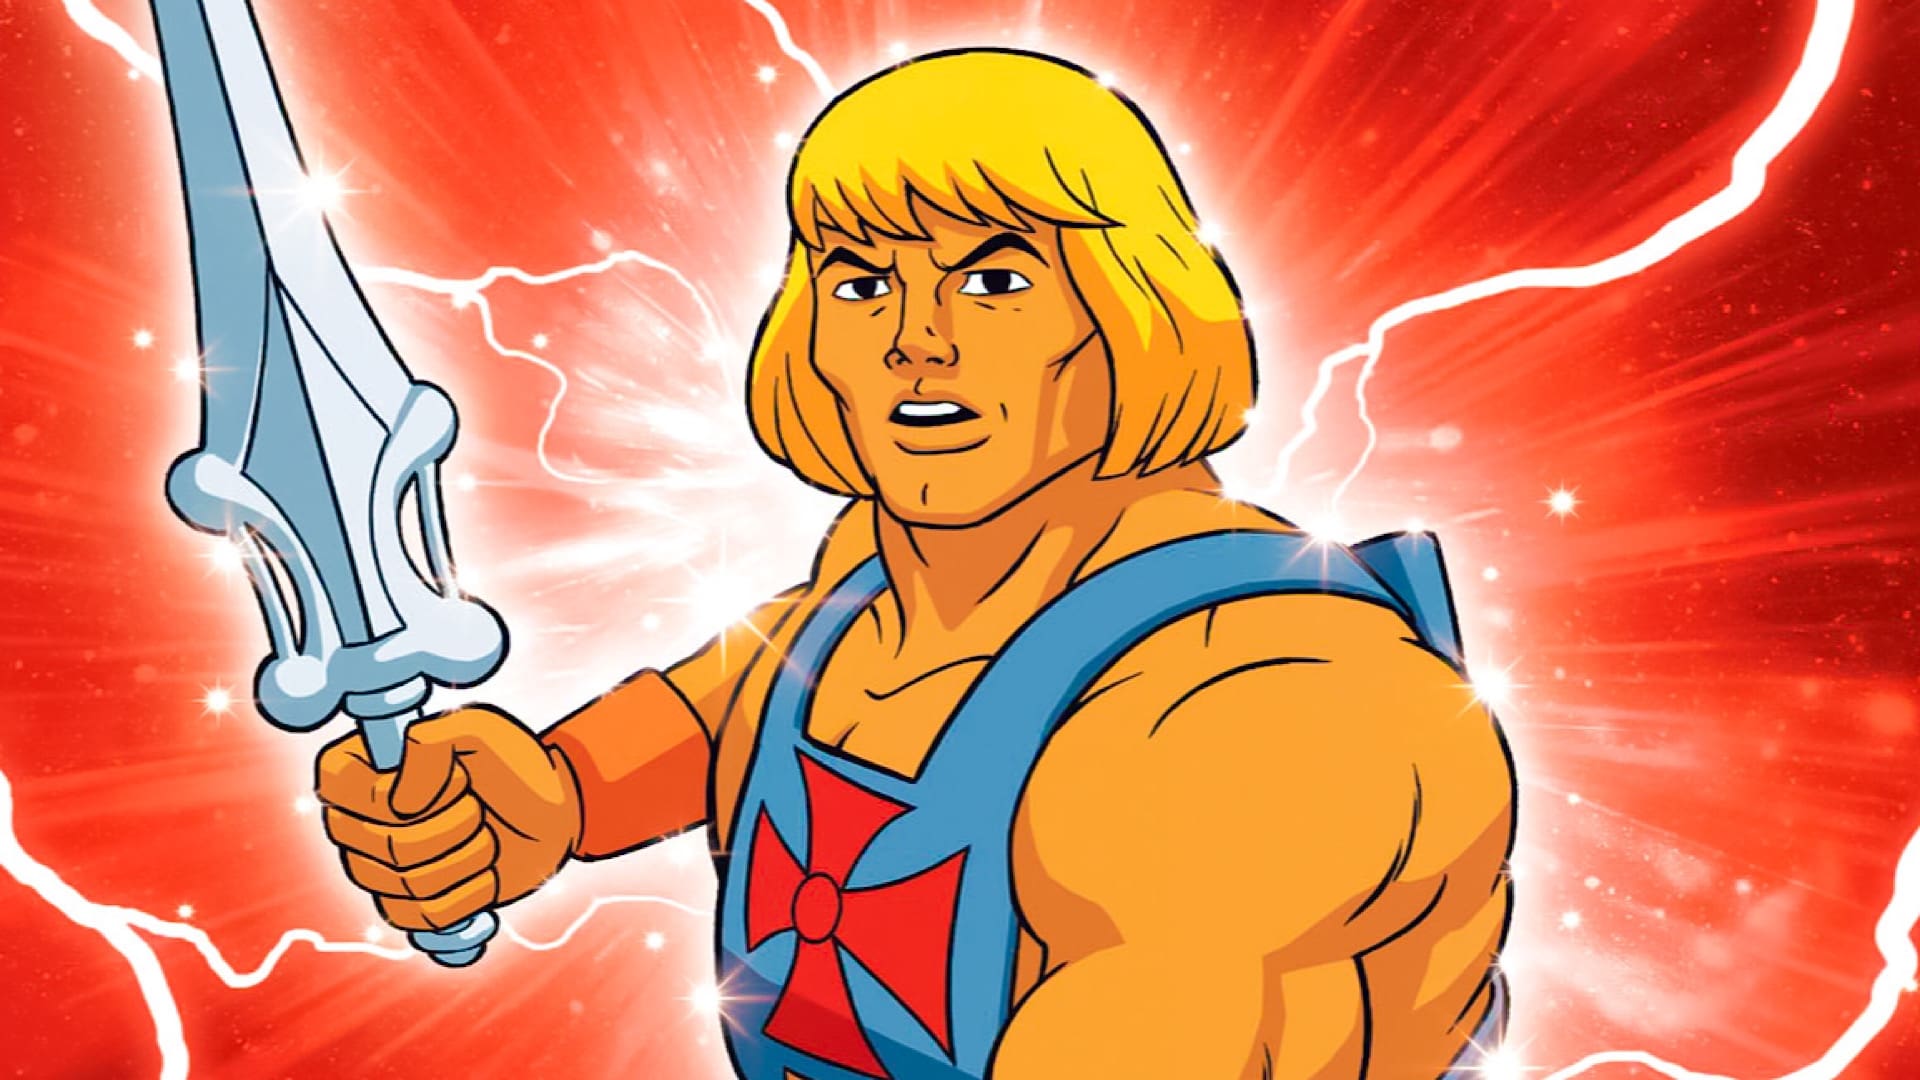 He-Man and the Masters of the Universe Gallery Image